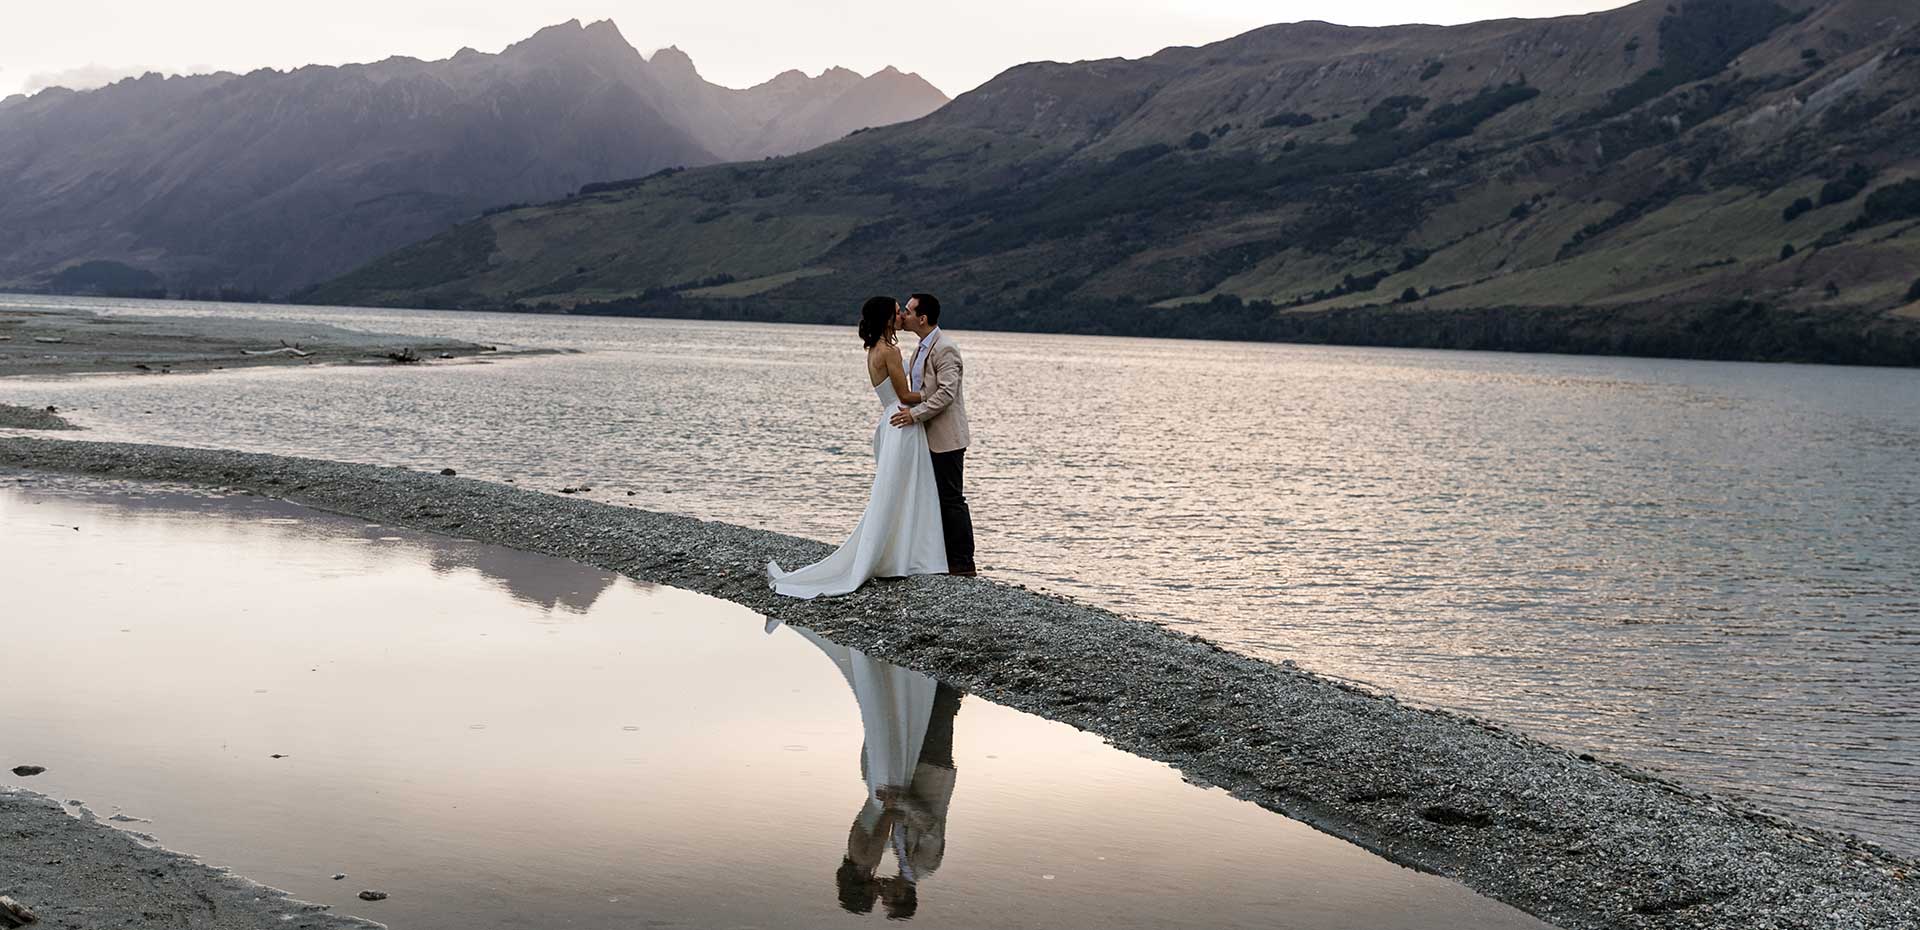 Elopement in Paradise followed by alpine photos